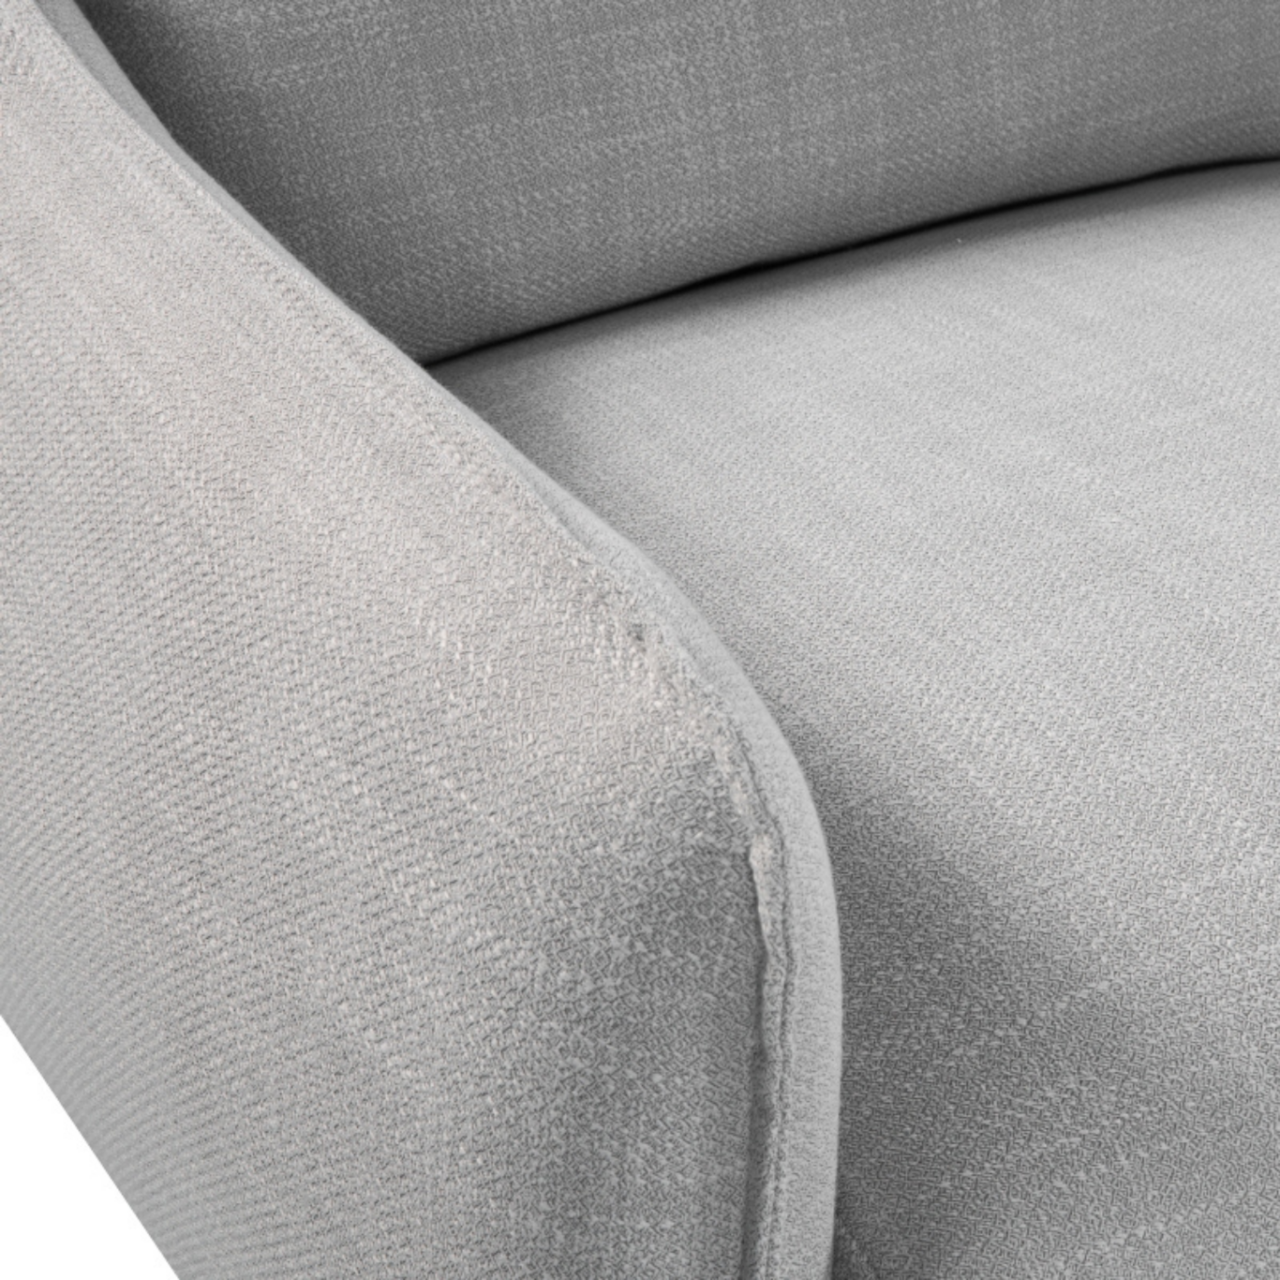 detail view of Simple, modern 2 seater sofa upholstered in grey linen fabric